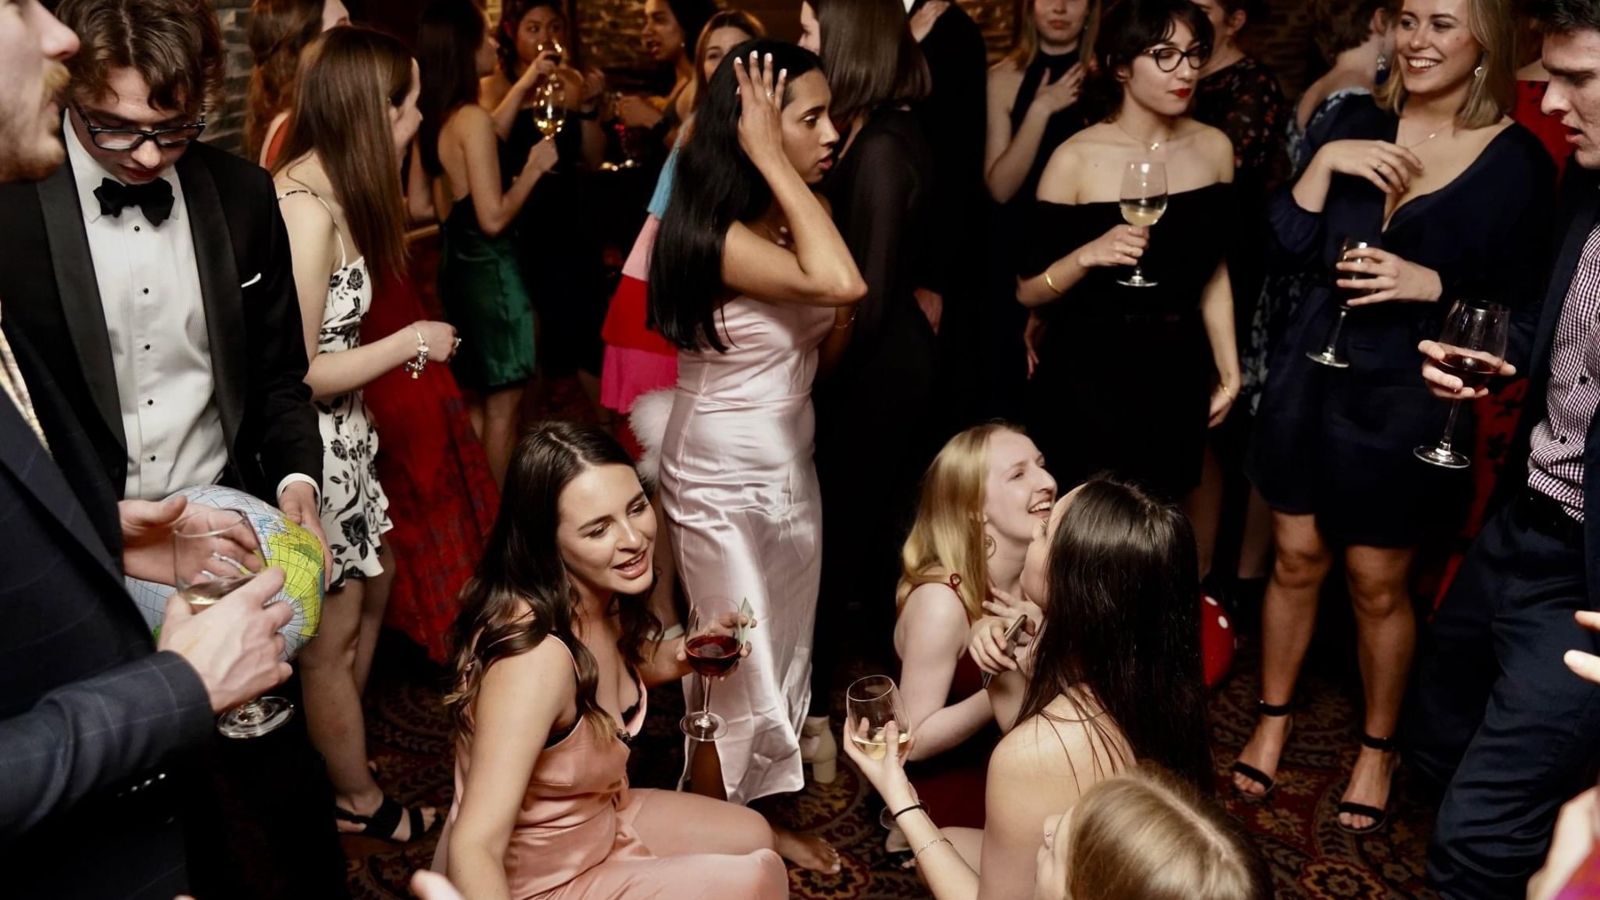 Students in formal dress, sitting, standing, dancing and drinking wine at French ball.